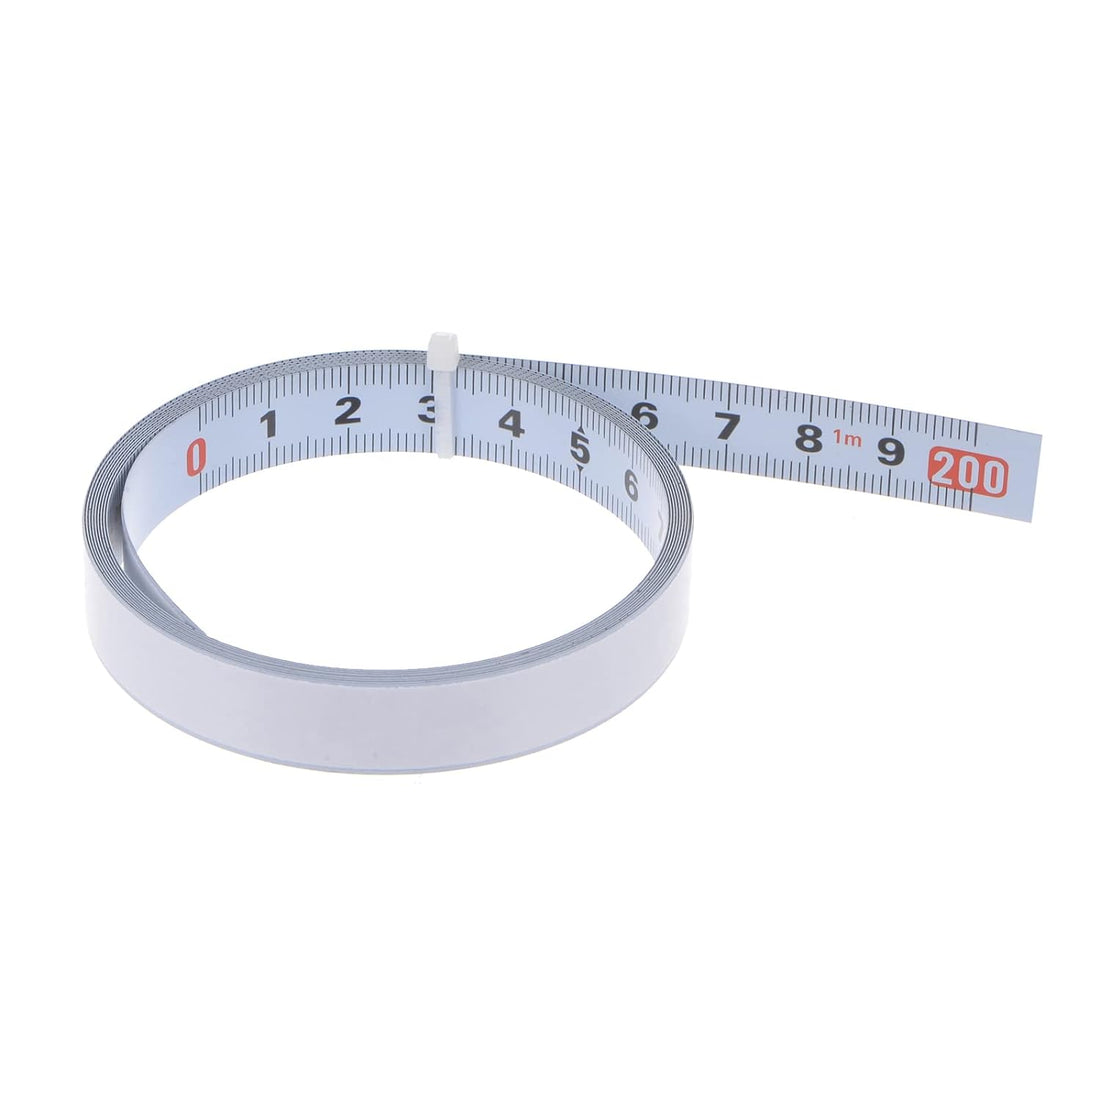 Anthroflex Wall Tape Measure 2m for Armspan